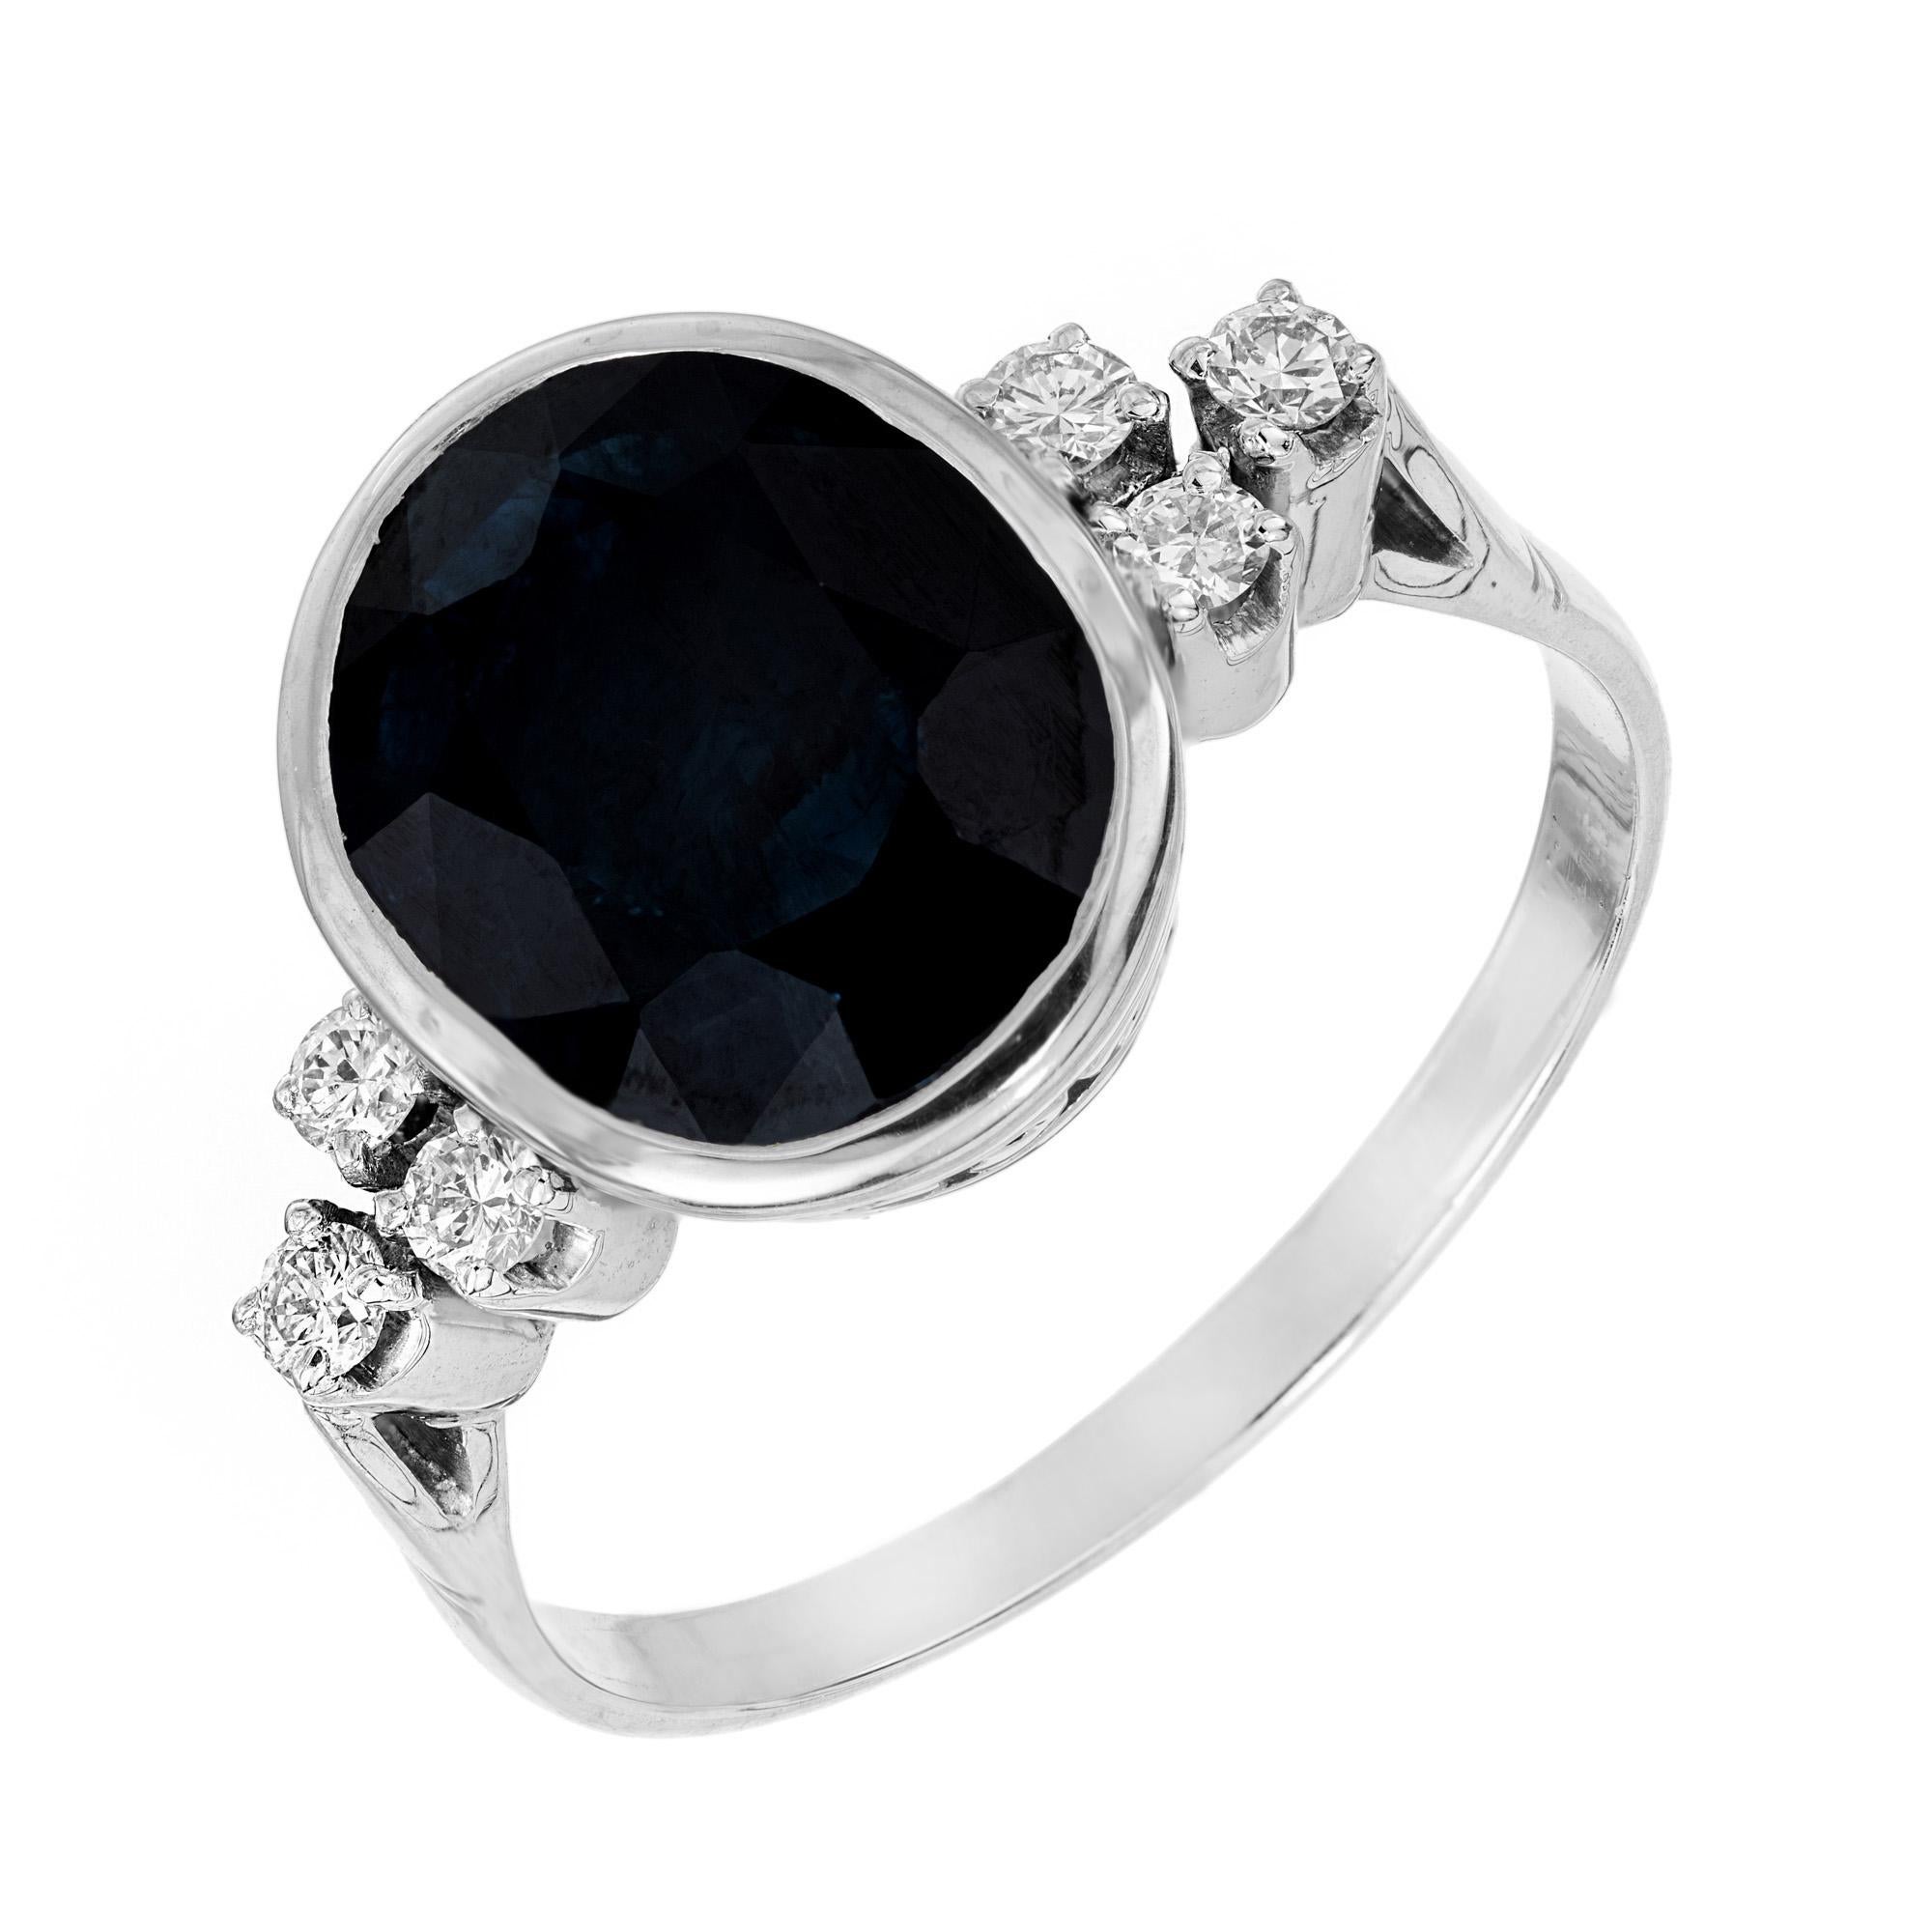 Wonderful oval 5.51 carat certified natural deep blue sapphire and diamond engagement ring. Mounted in its original 1950's bezel platinum platinum setting with a filigree crown. The sapphire is accented by 3 round brilliant cut diamonds on each side